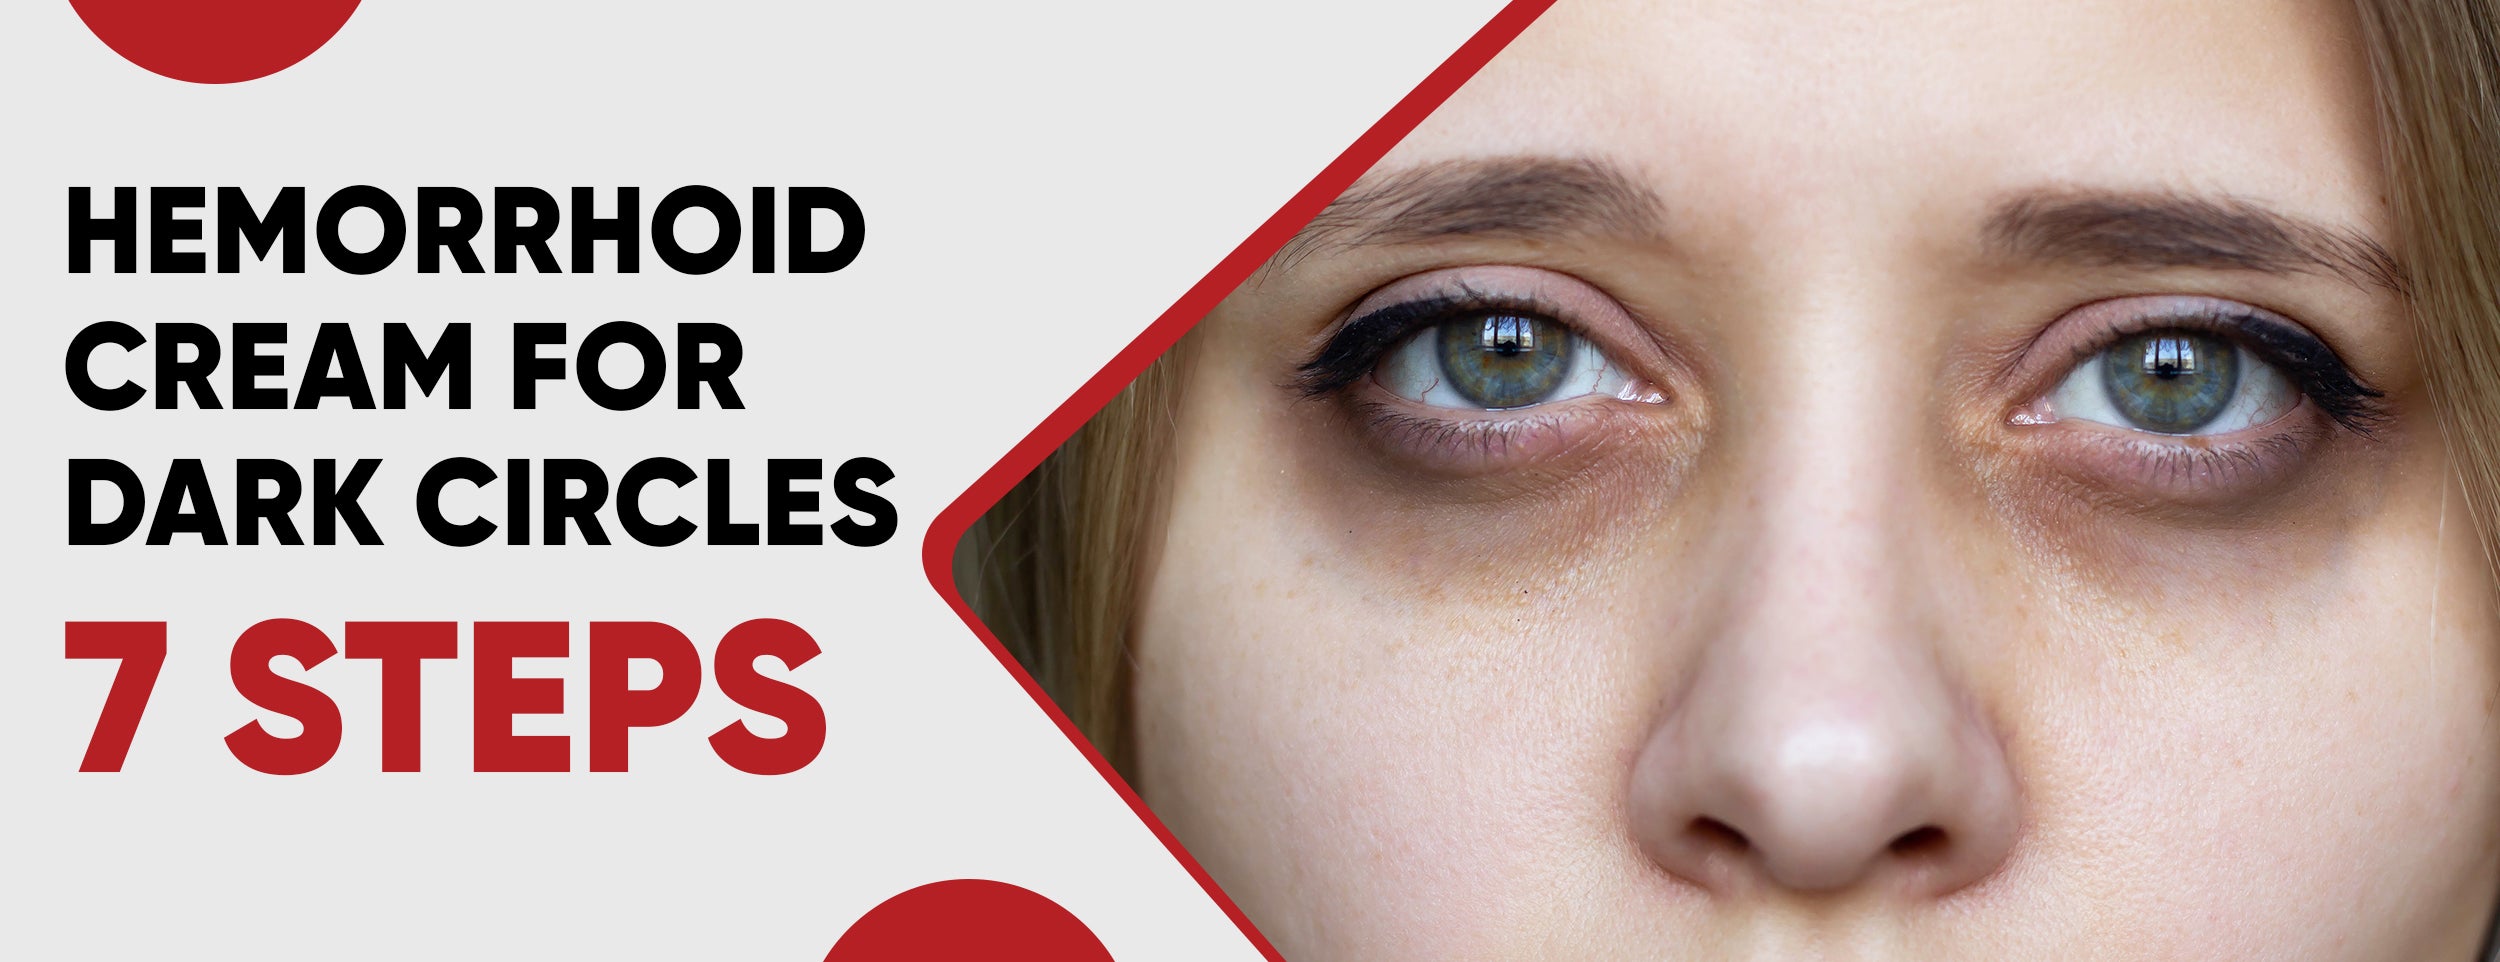 Dark circles caused by hemorrhoids can be treated with a hemorrhoid cream